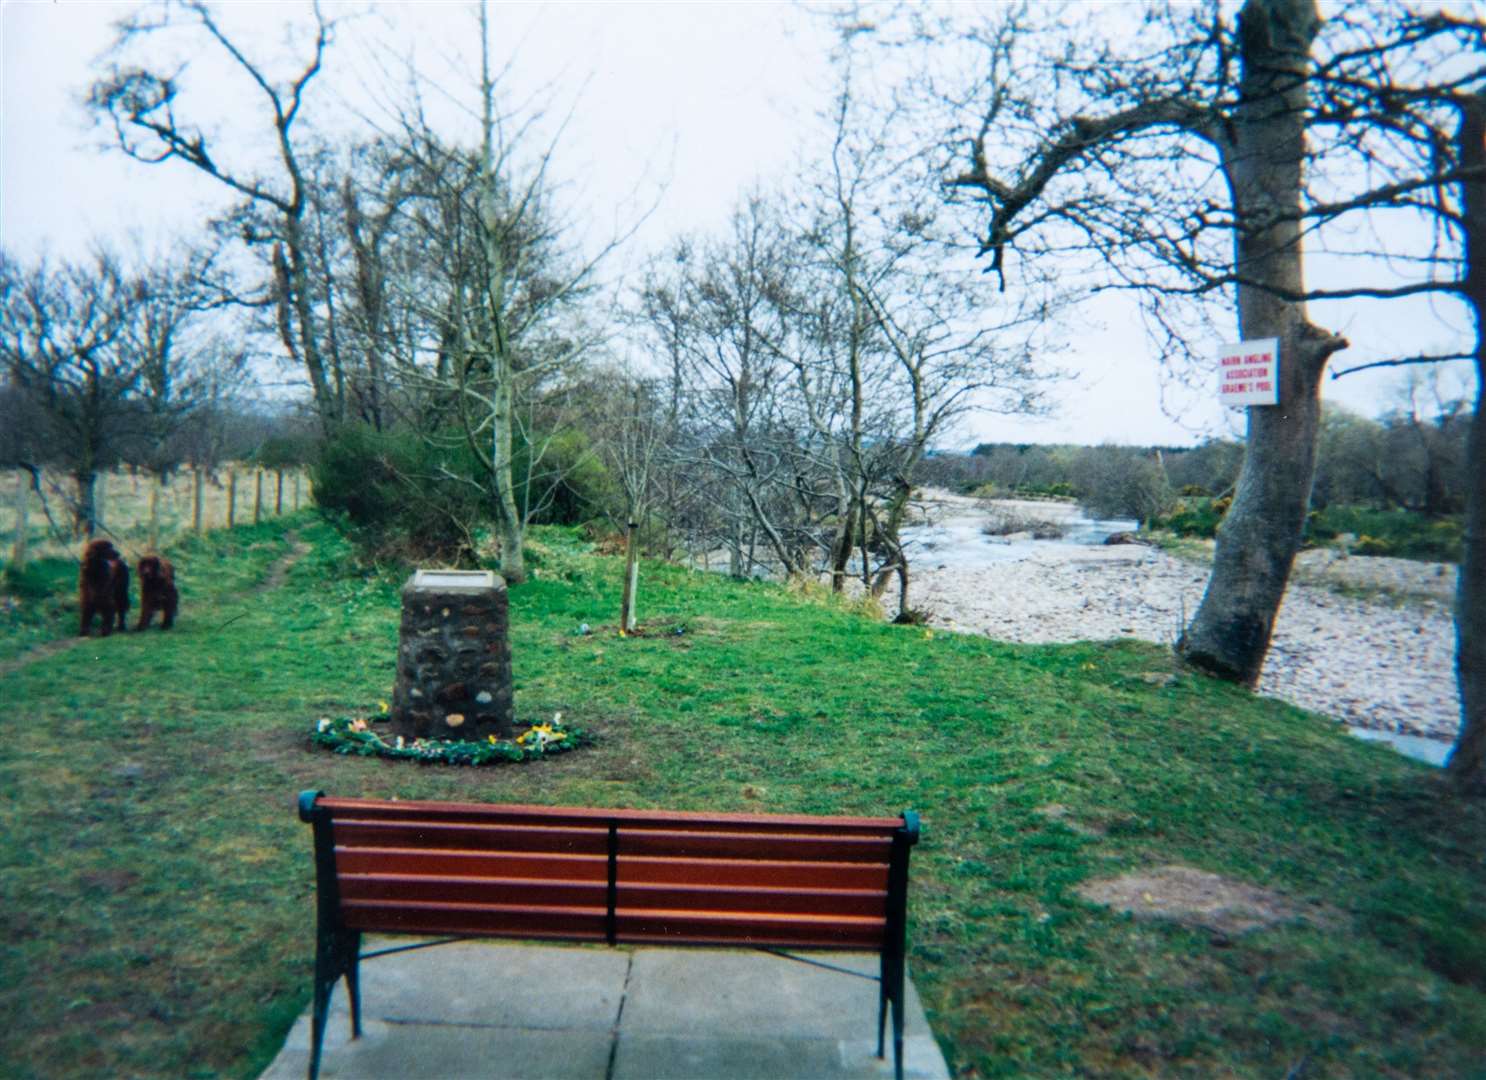 Land between the river and memorial cairn has been eroded over time.